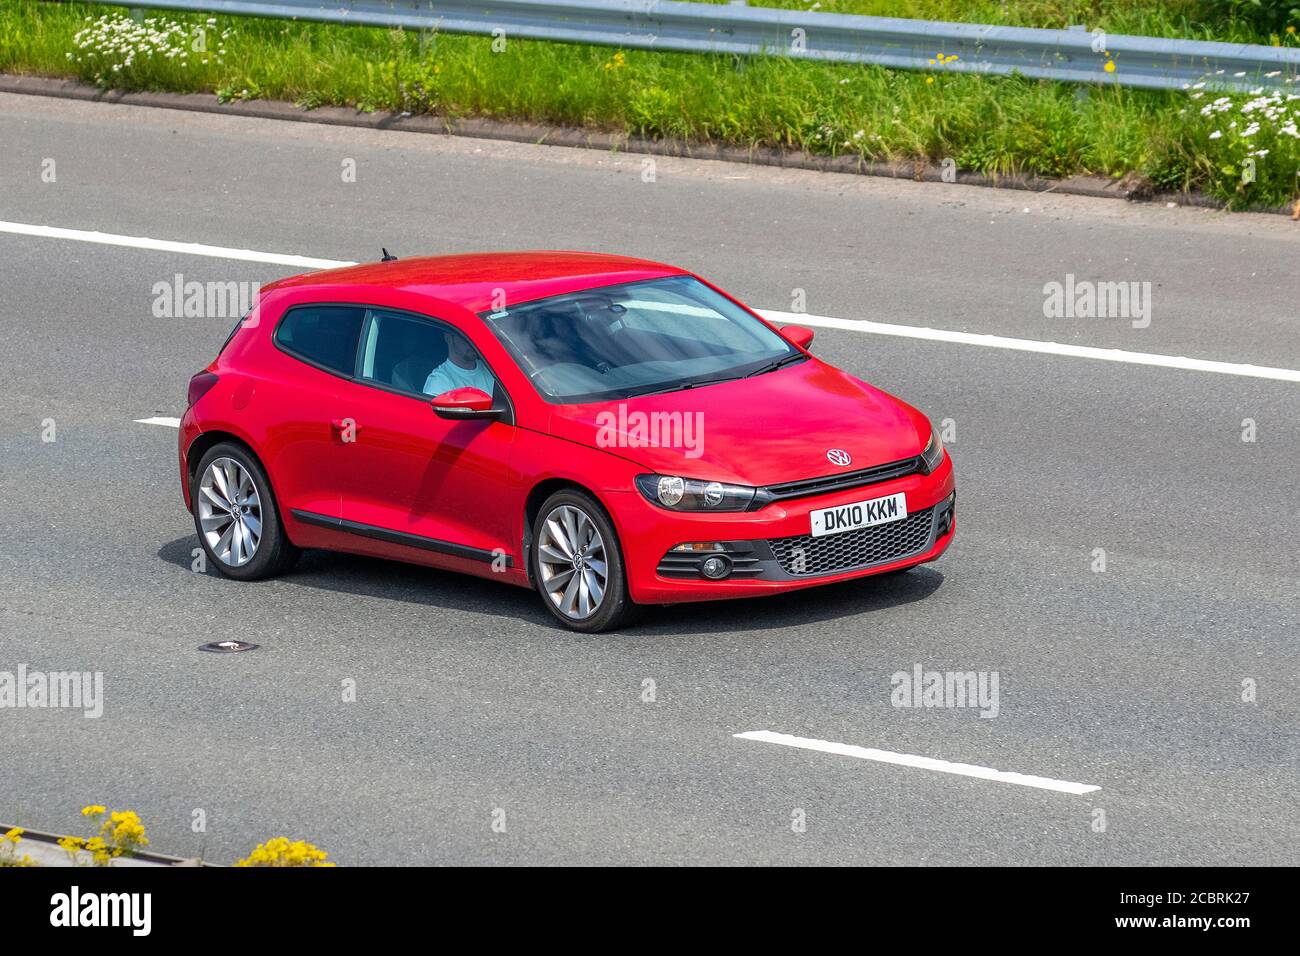 Volkswagen scirocco red cars and images -